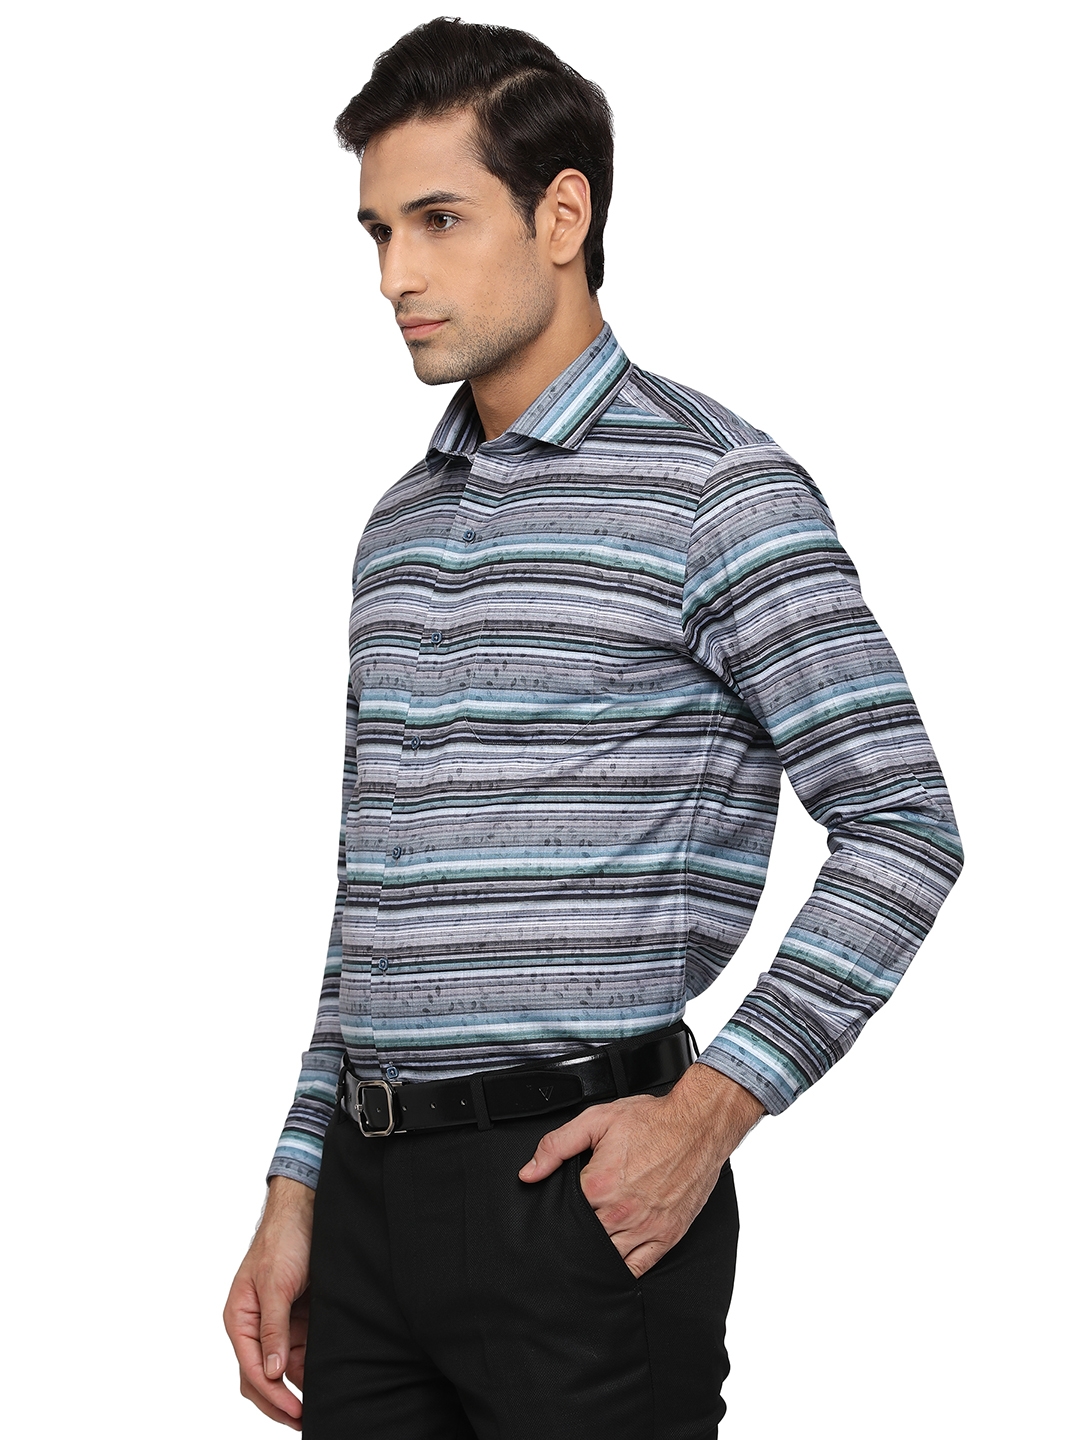 Blue & Grey Printed Slim Fit Party Wear Shirt | Greenfibre